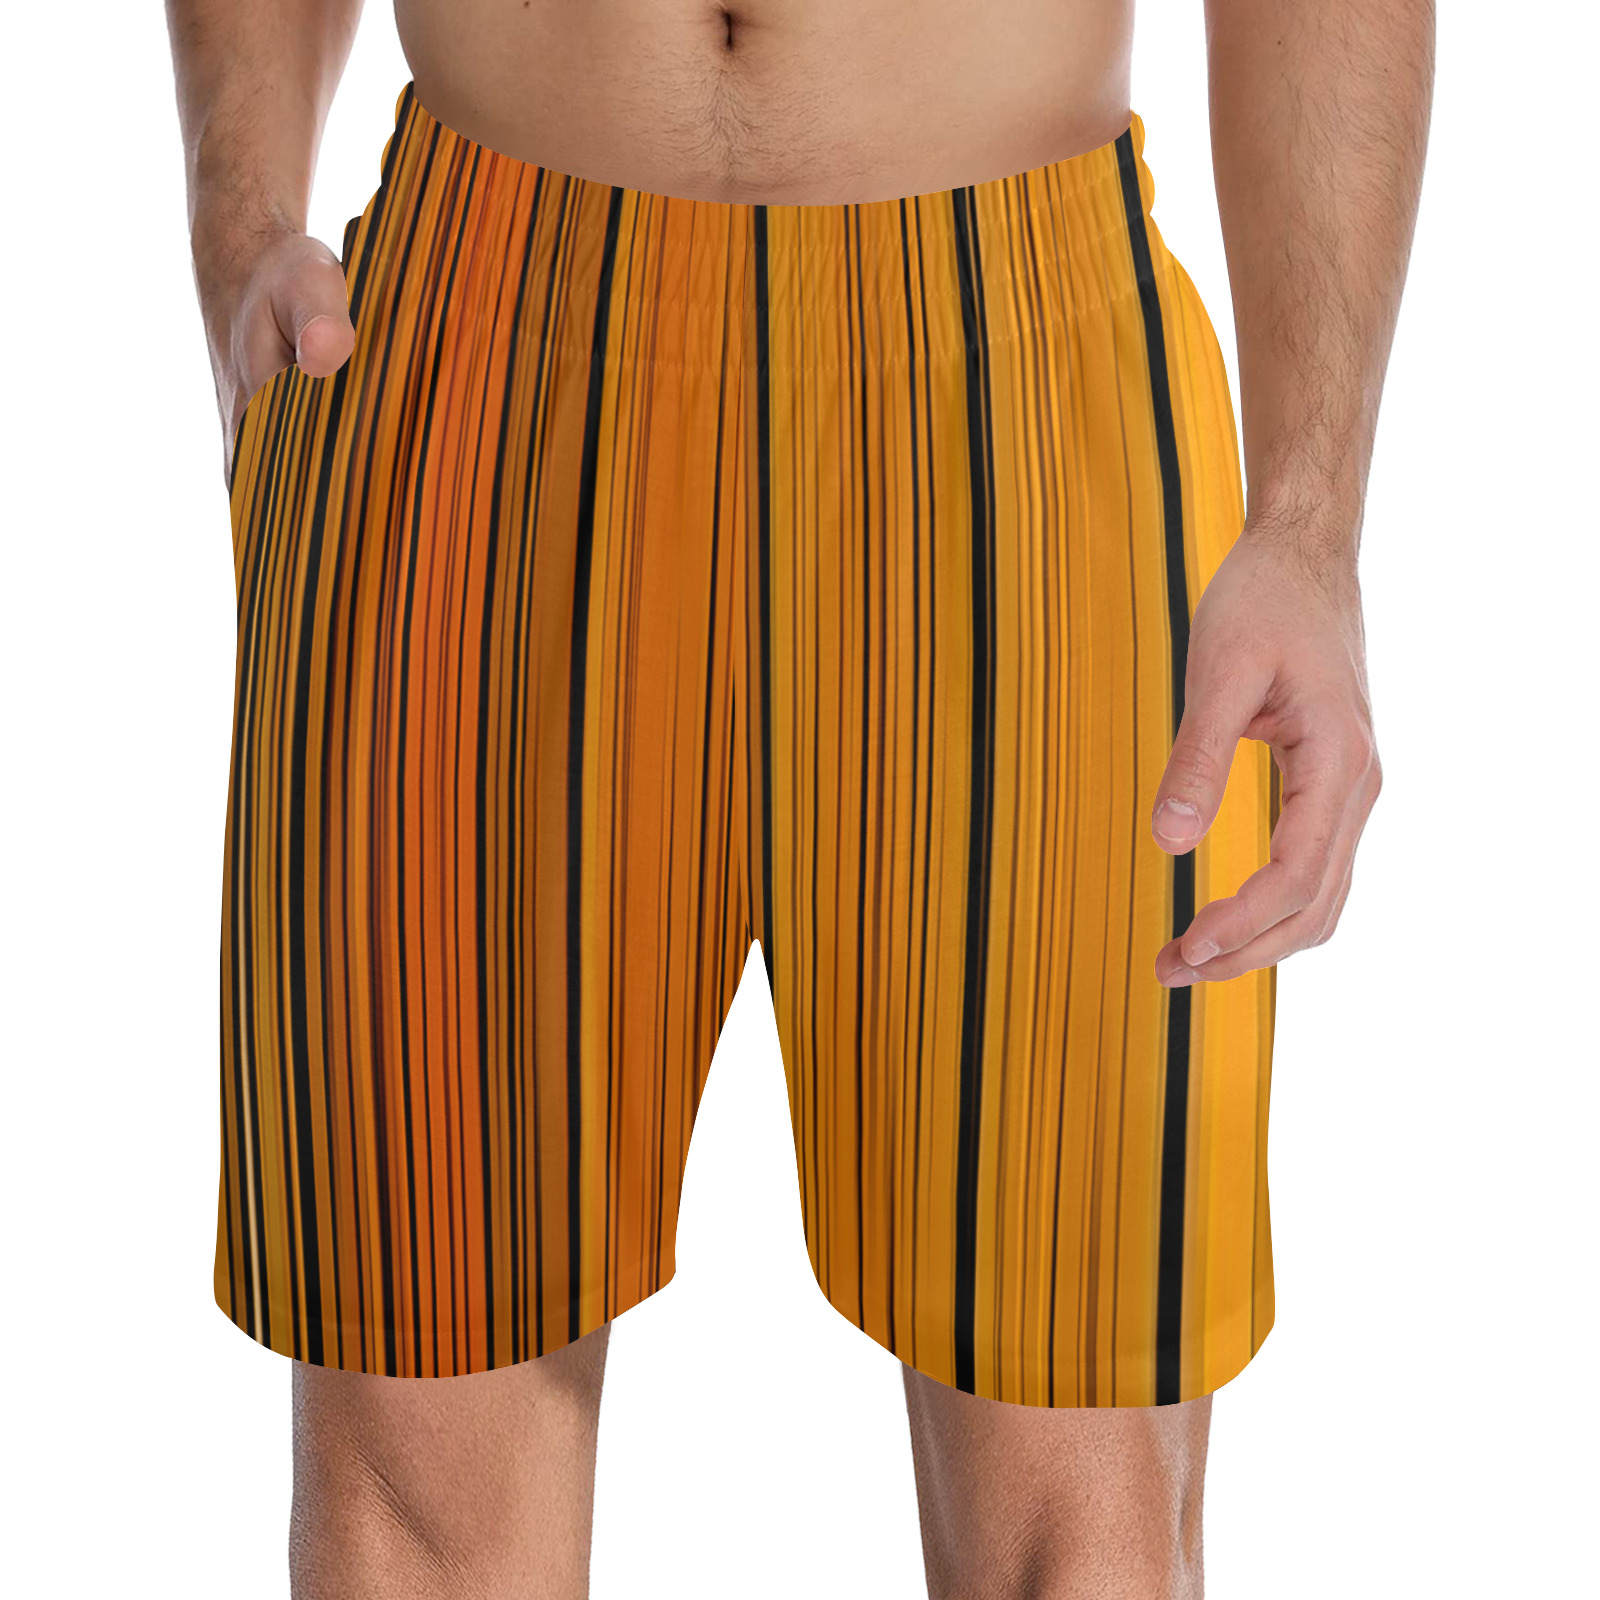 Butterfly Colors Men's Pajama Shorts